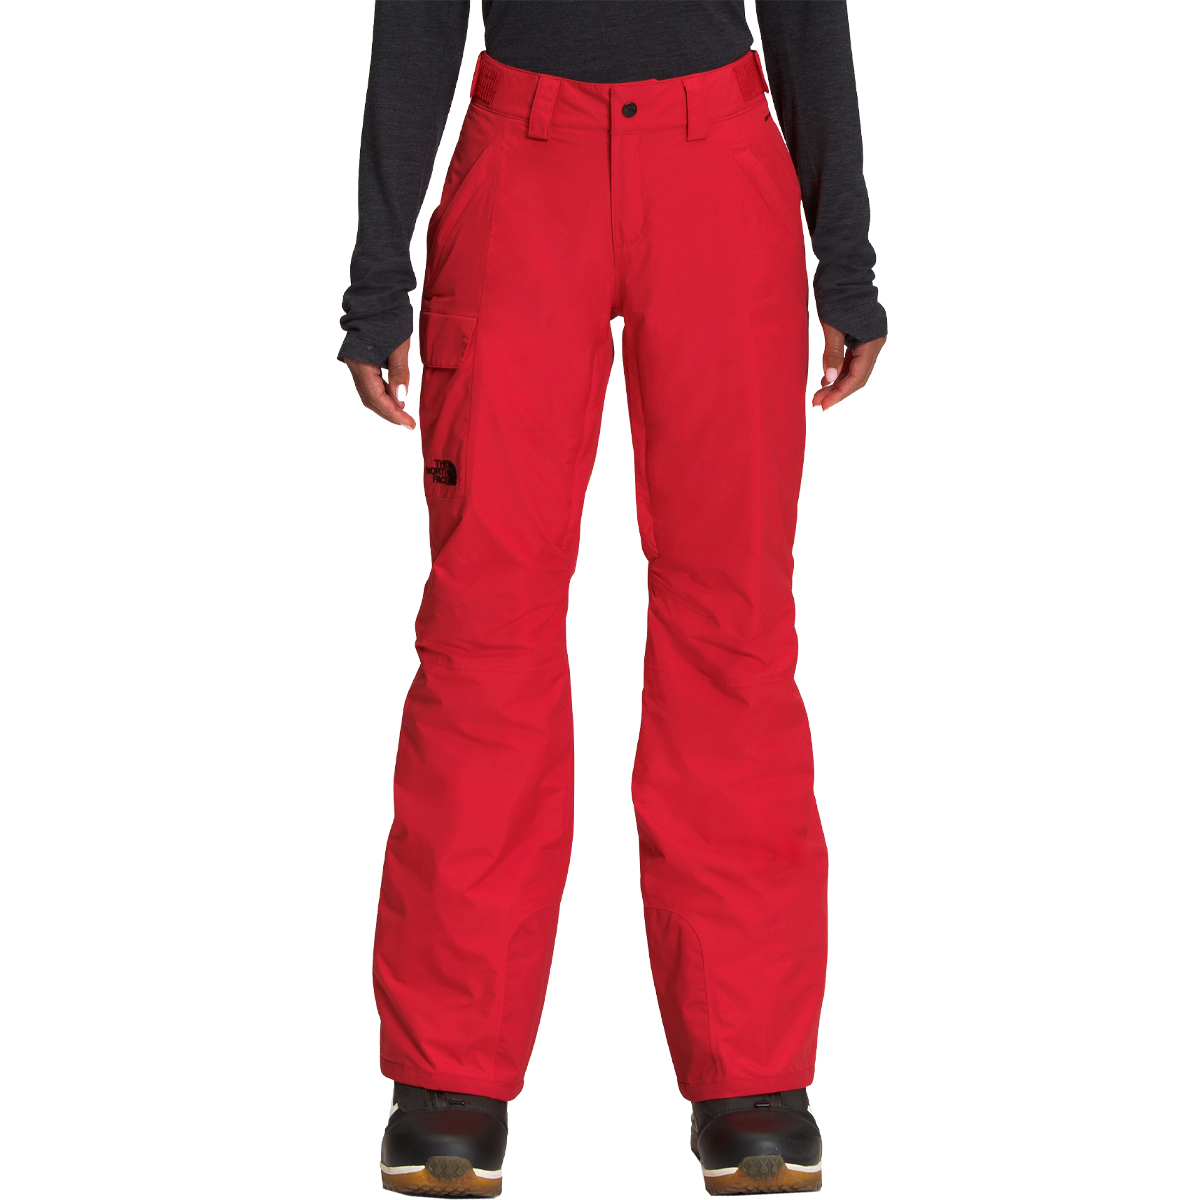 Women's Freedom Insulated Pant alternate view